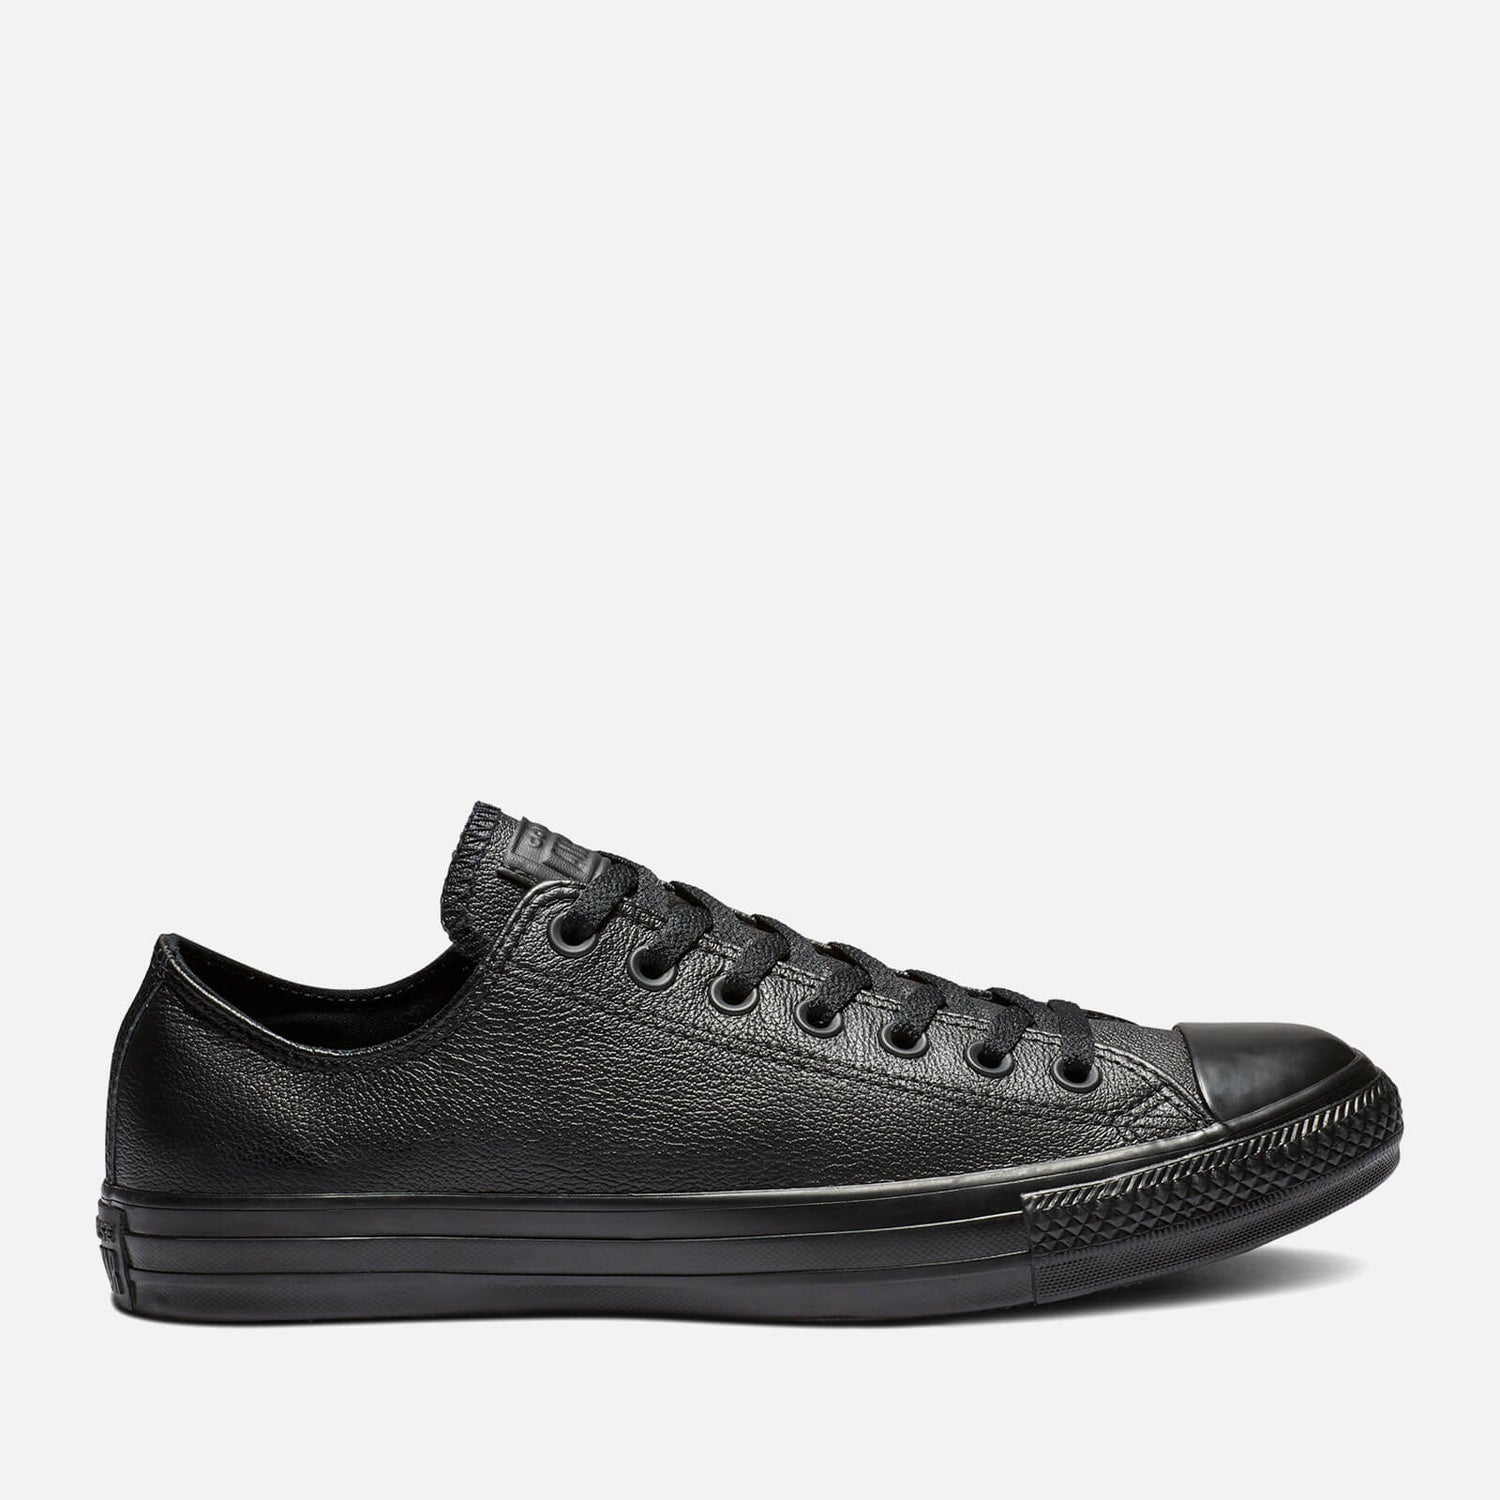 Converse Chuck Taylor All Star Ox Trainers - Black Mono - UK 7